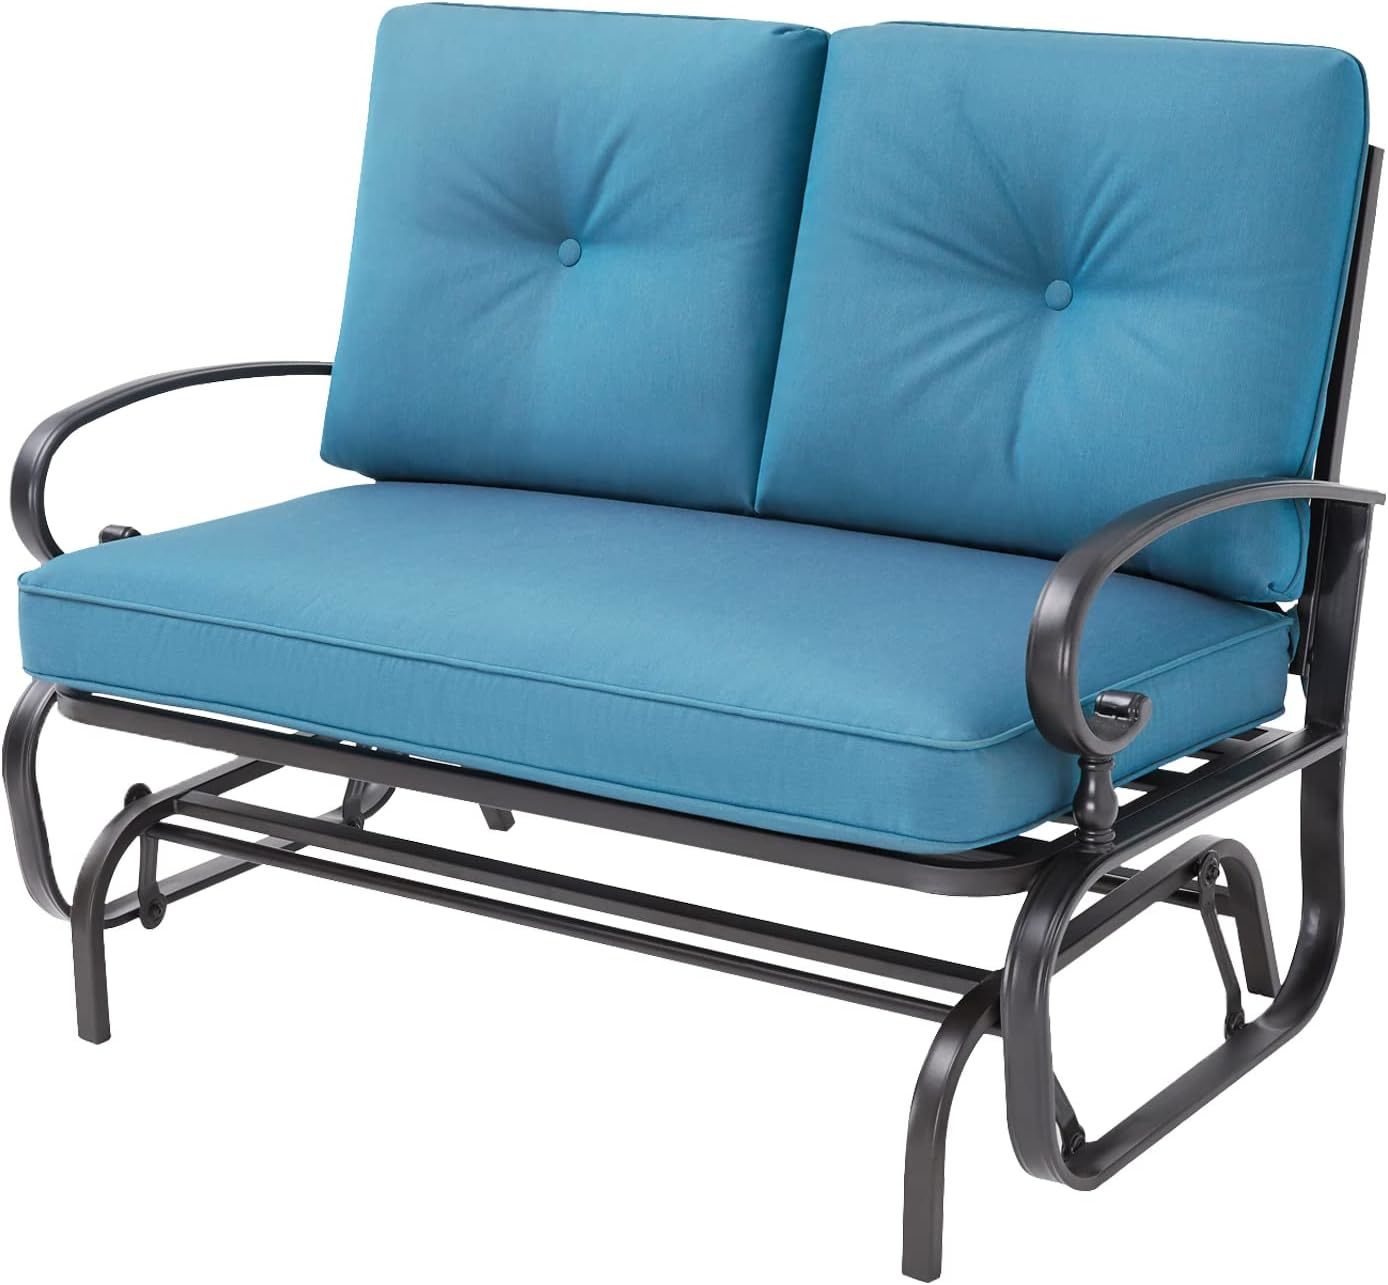 Primary image for Patiomore Outdoor Bench Patio Swing Glider Loveseat 2 Seats Rocking Chair,